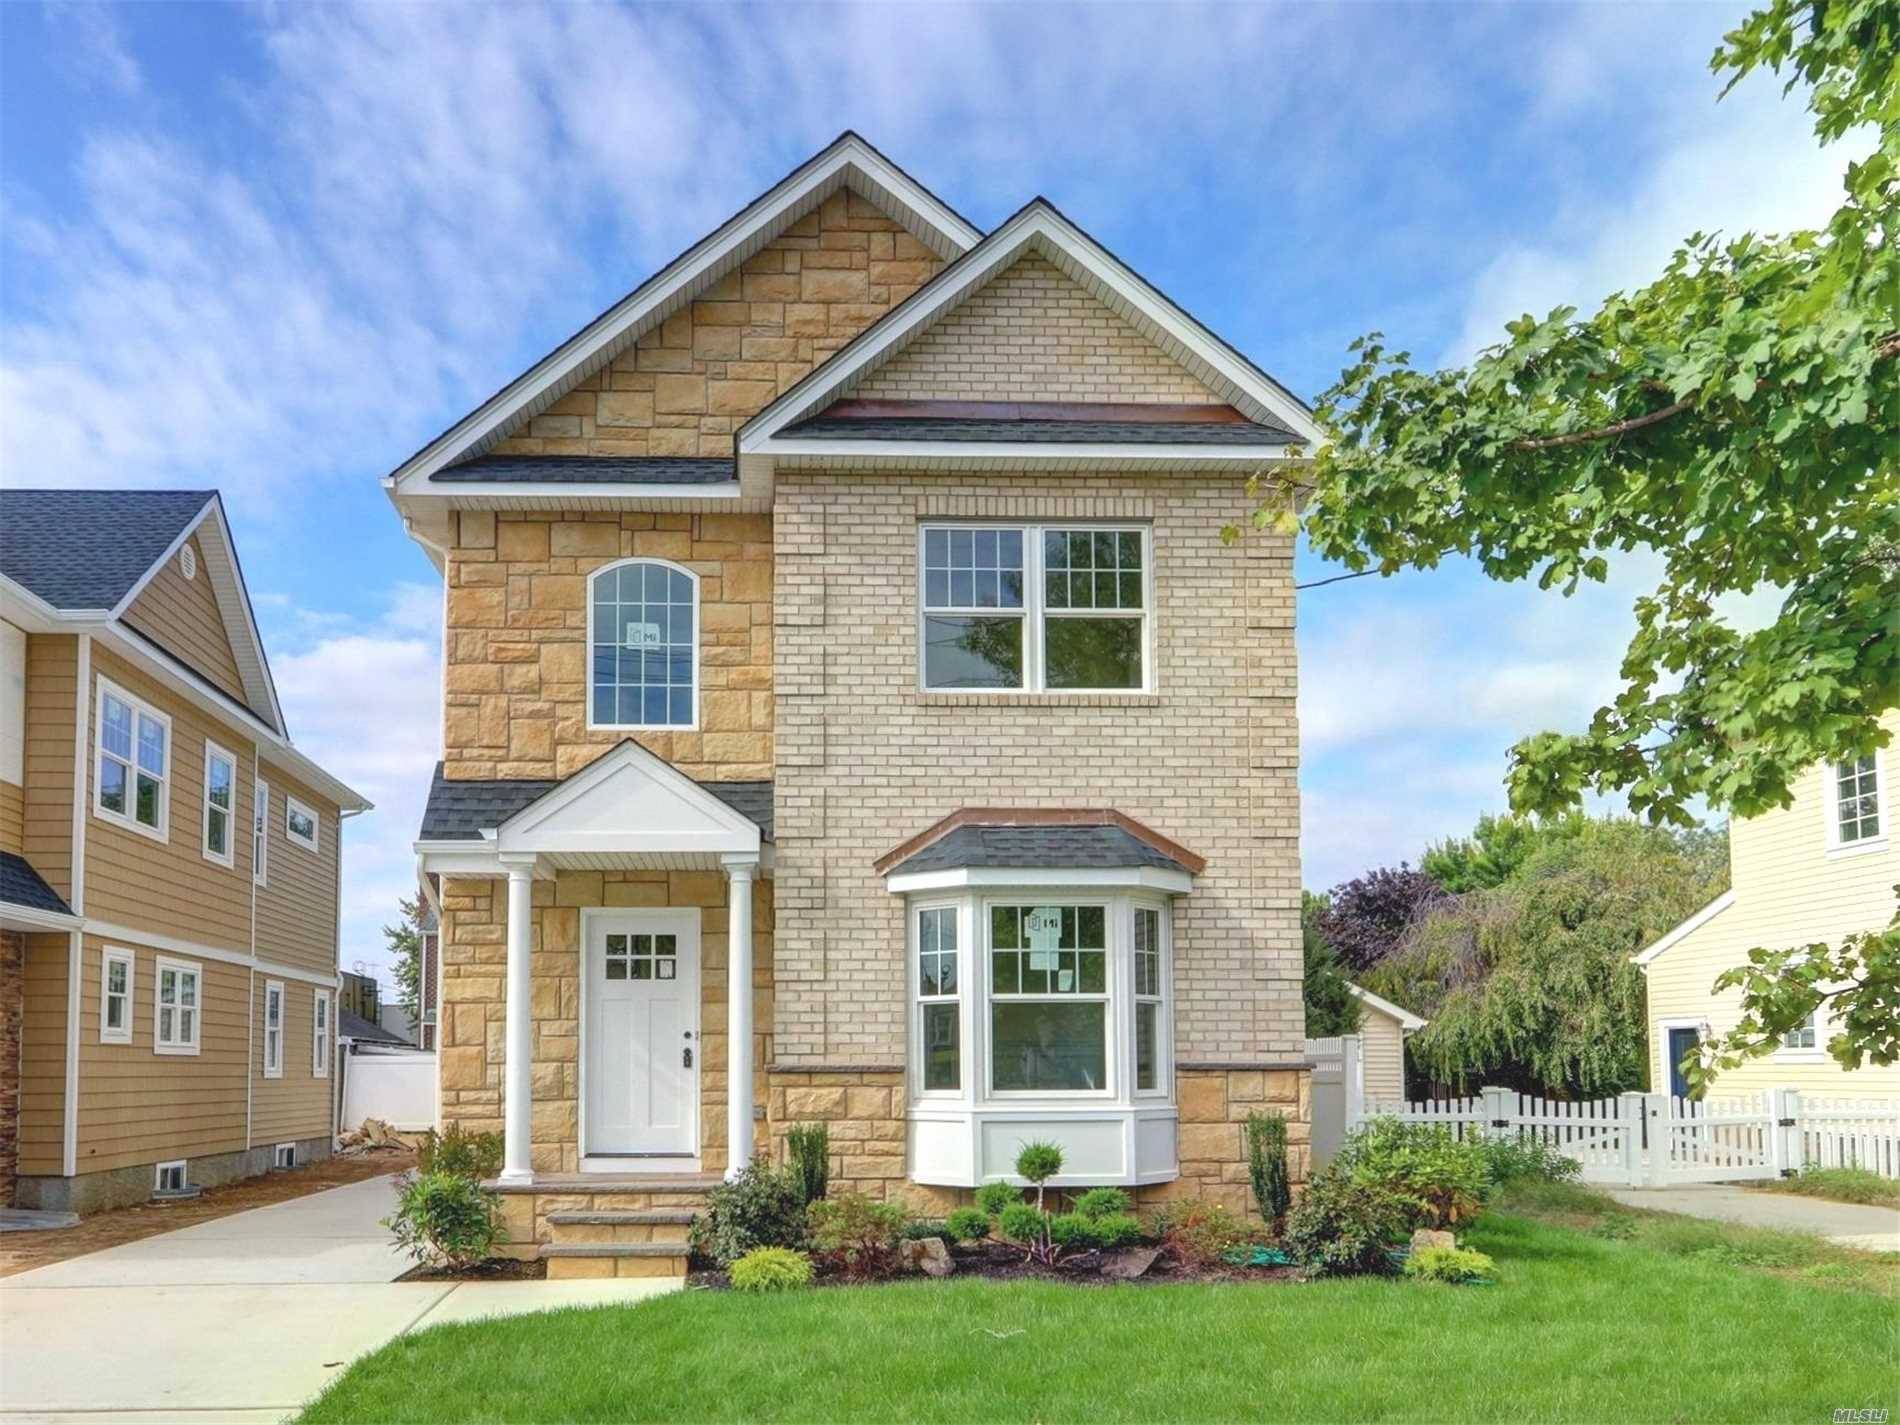 Stunning New Construction In Floral Park!